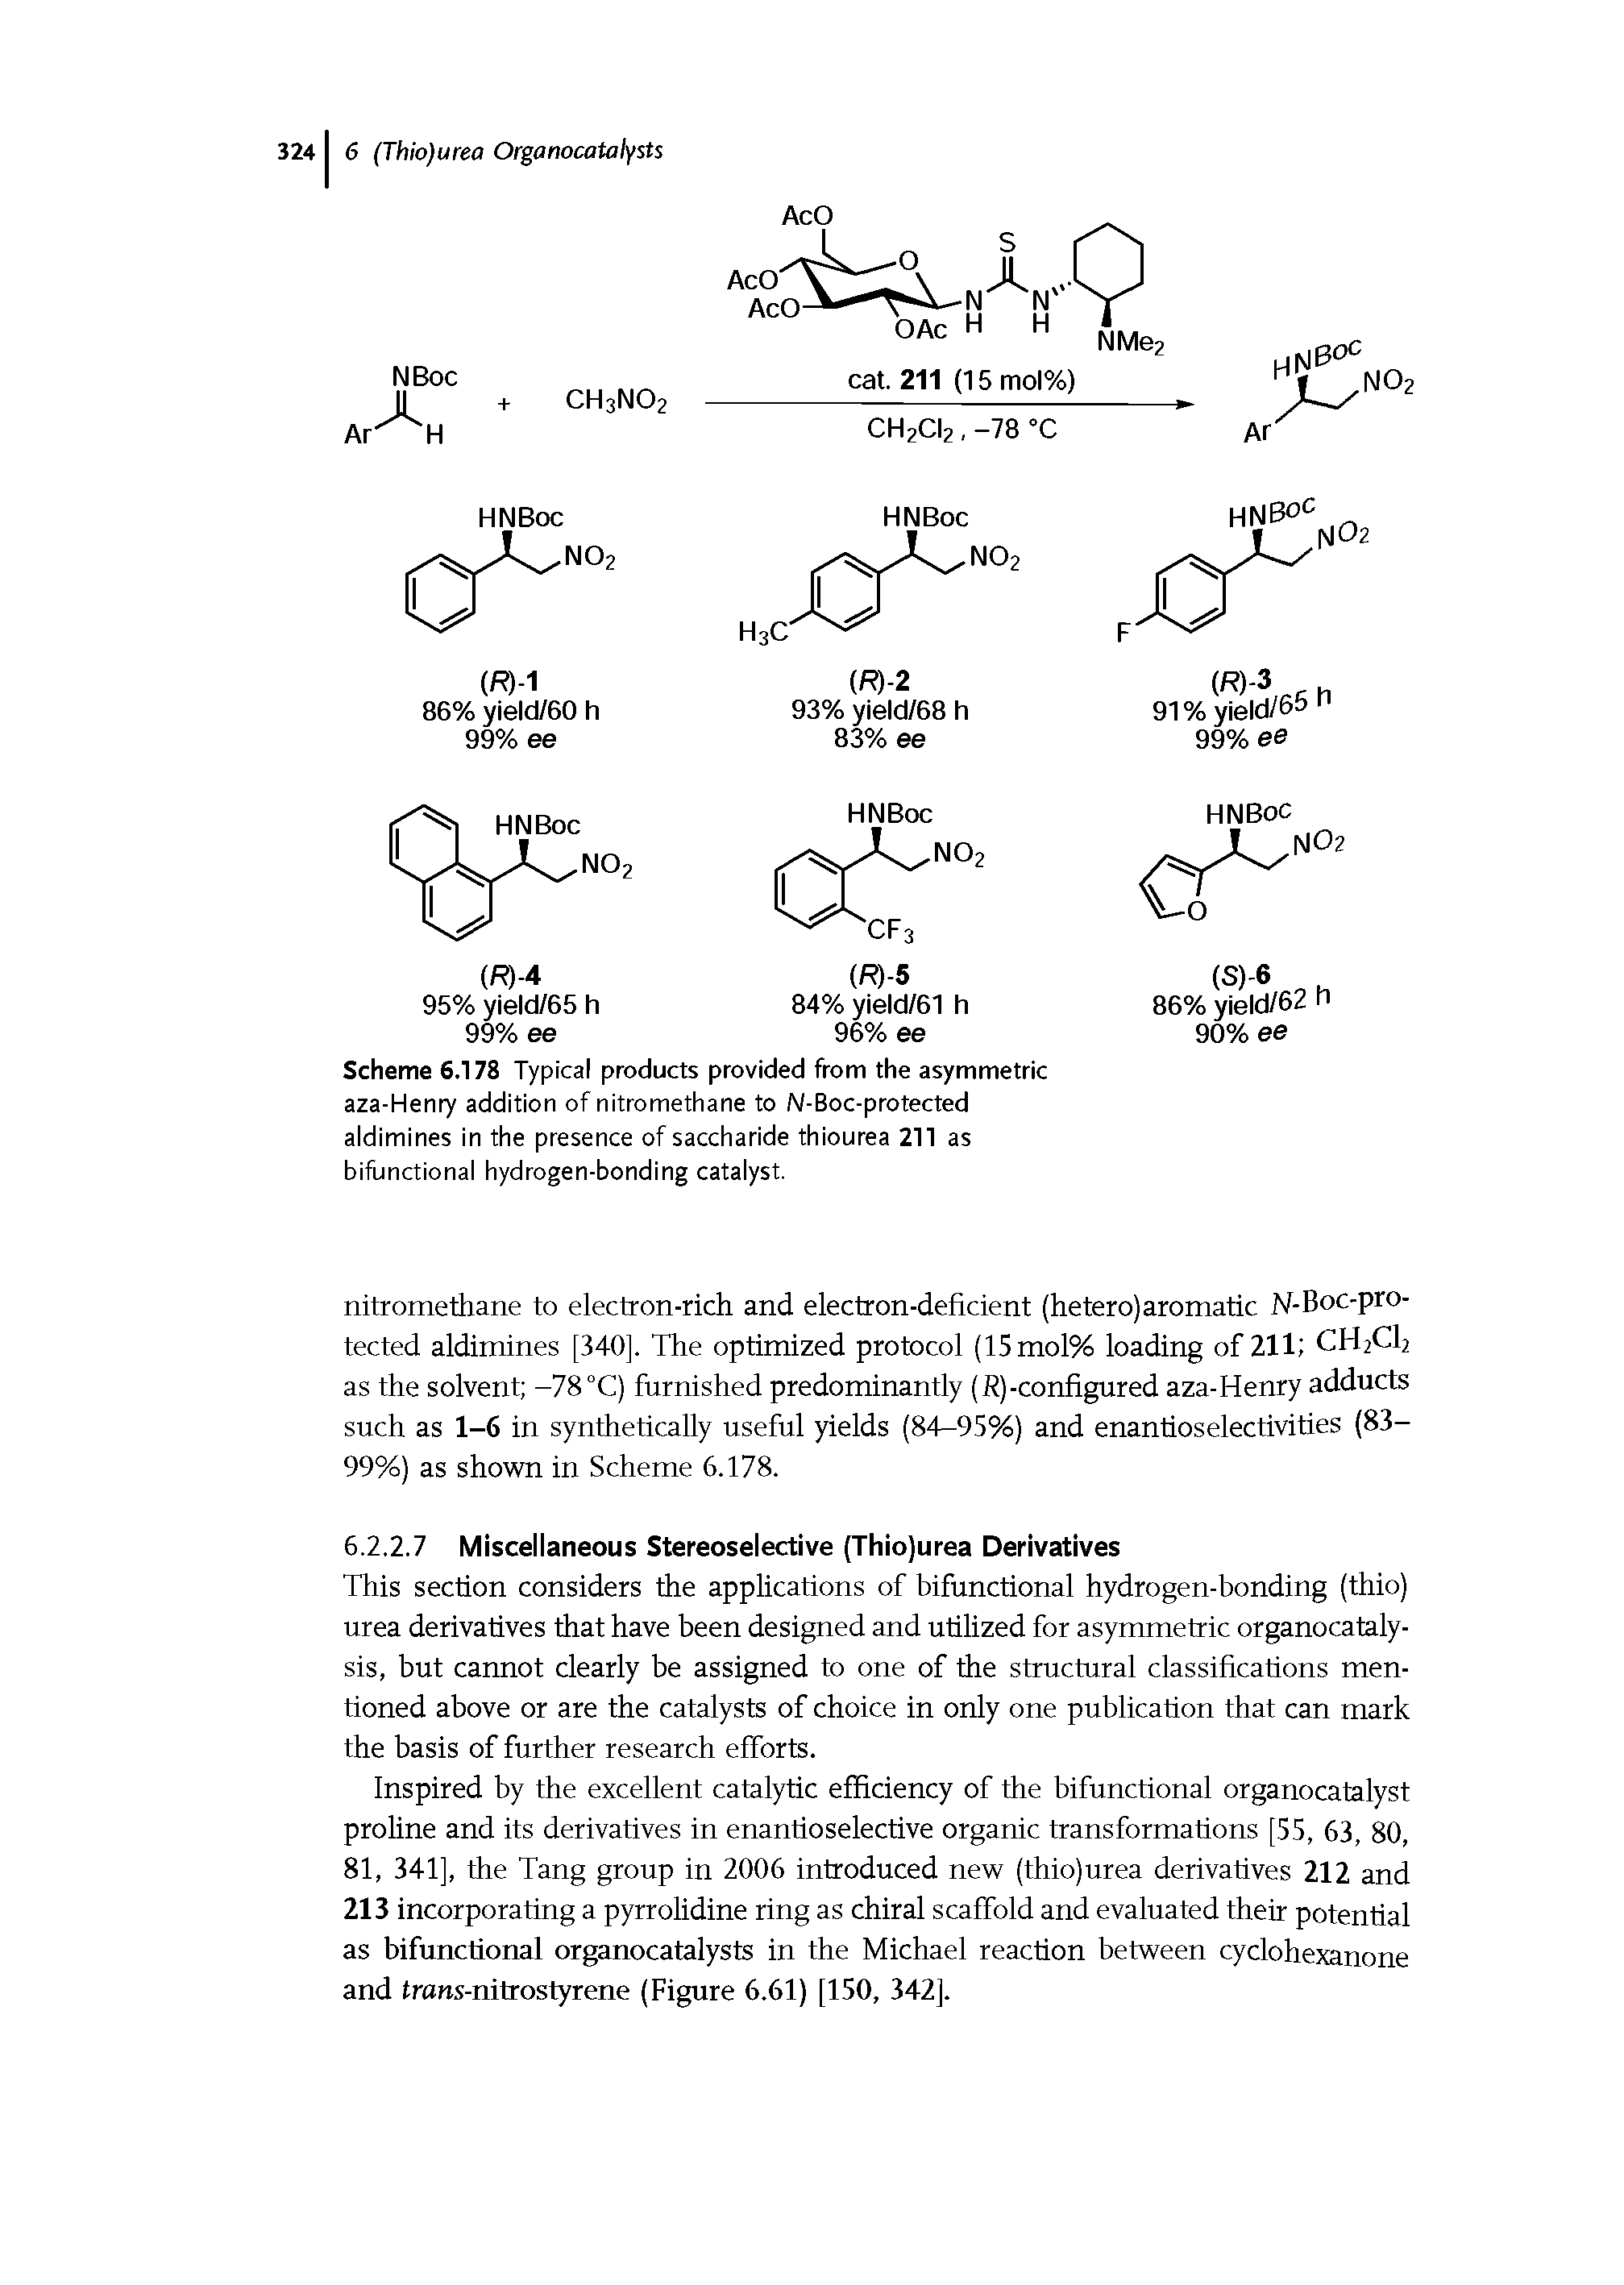 Scheme 6.178 Typical products provided from the asymmetric aza-Henry addition of nitromethane to N-Boc-protected aldimines in the presence of saccharide thiourea 211 as bifunctional hydrogen-bonding catalyst.